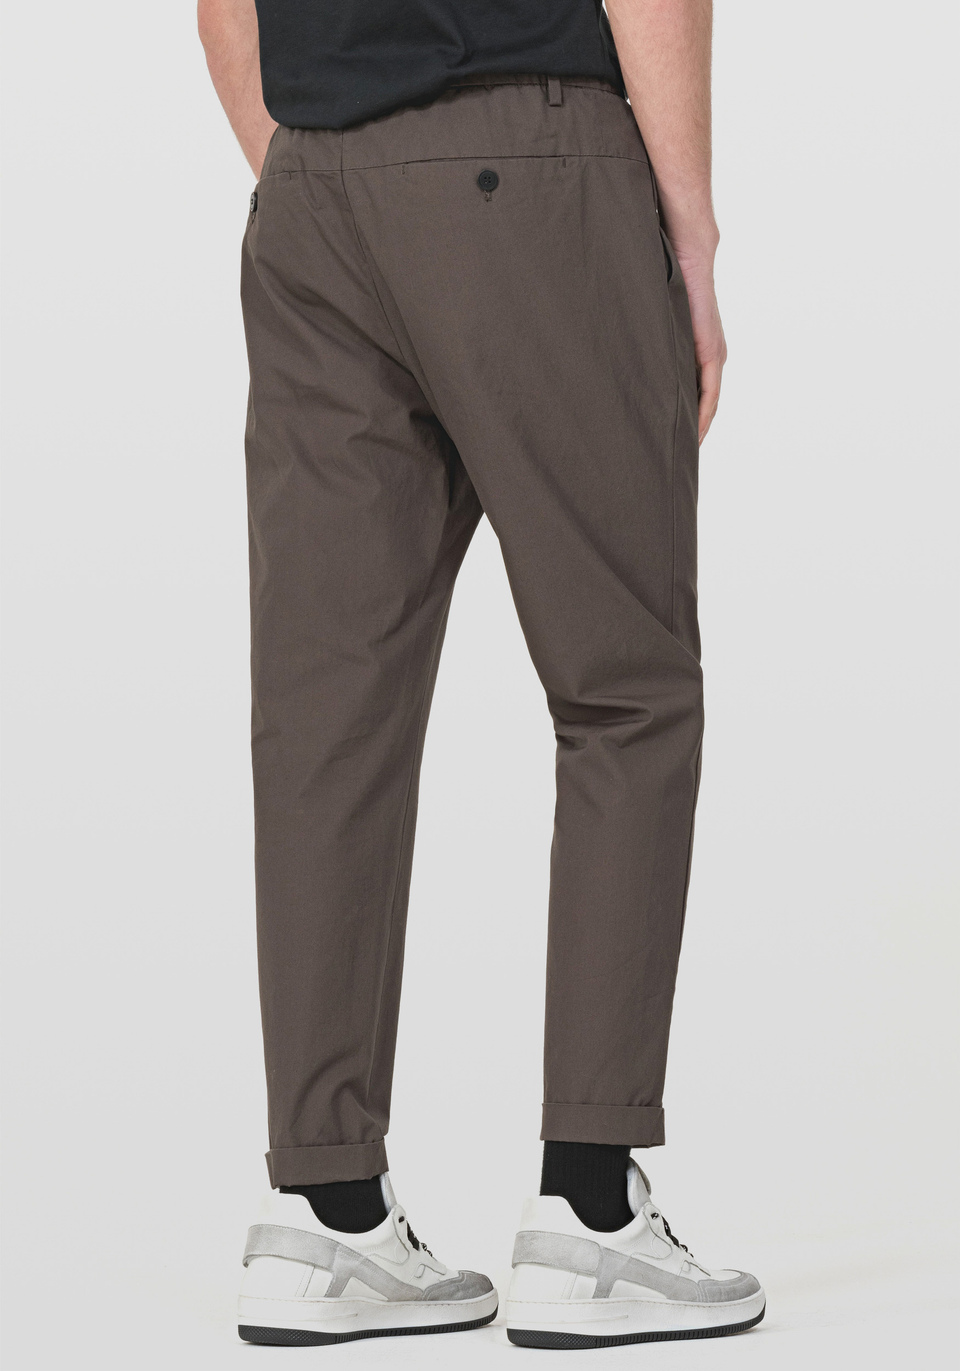 COMFORT-FIT CARROT-STYLE TROUSERS IN 100% COTTON WITH A DROPPED CROTCH - Antony Morato Online Shop